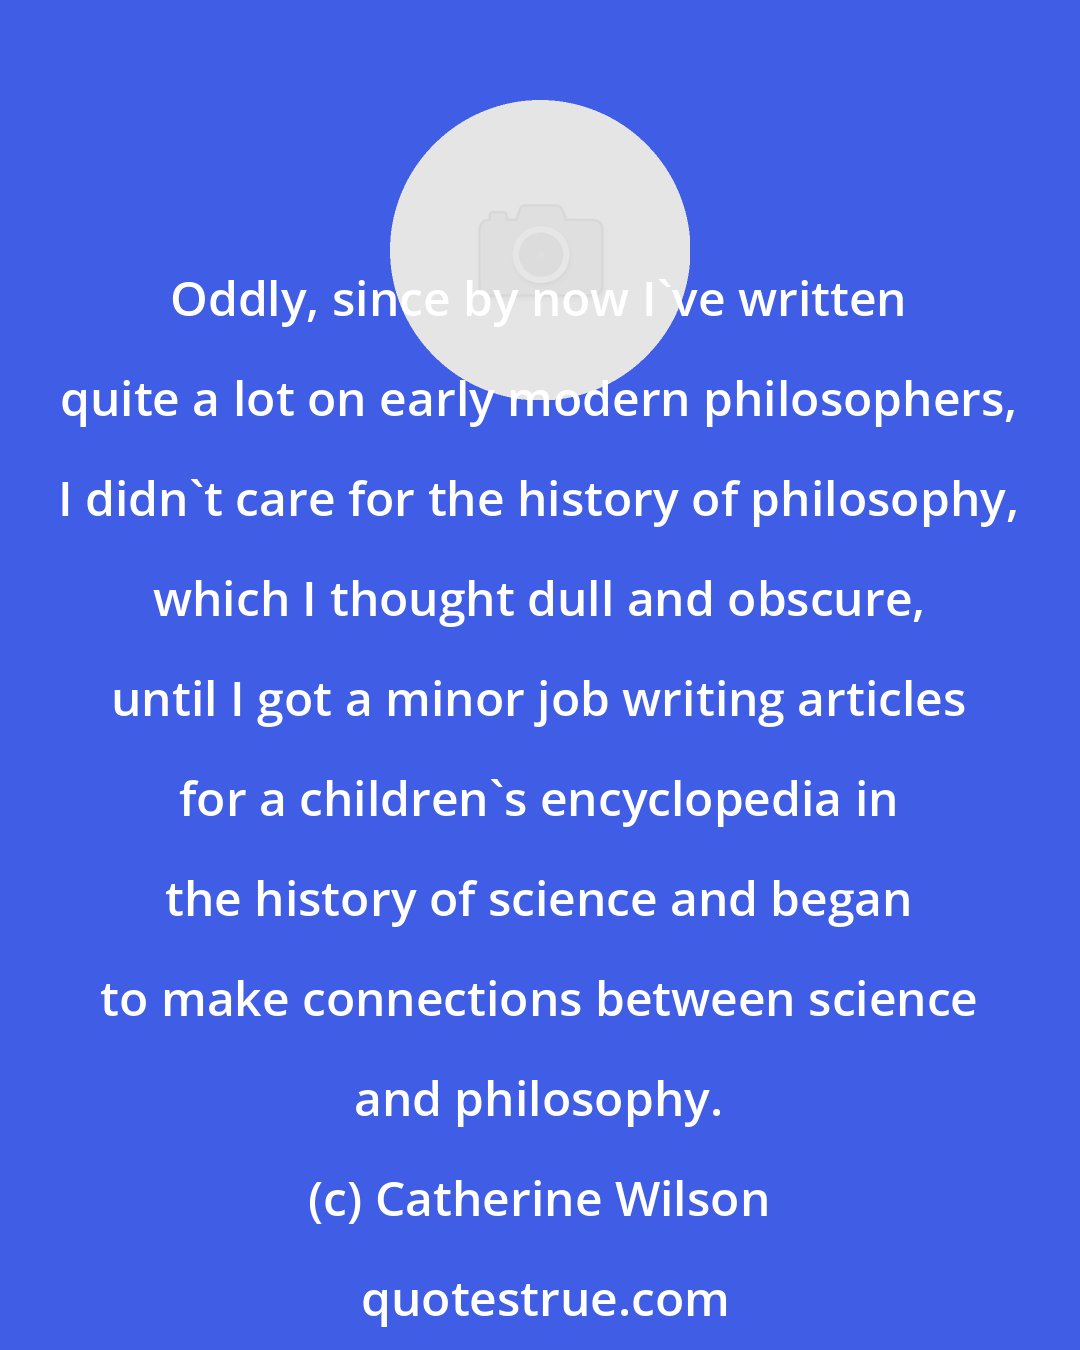 Catherine Wilson: Oddly, since by now I've written quite a lot on early modern philosophers, I didn't care for the history of philosophy, which I thought dull and obscure, until I got a minor job writing articles for a children's encyclopedia in the history of science and began to make connections between science and philosophy.